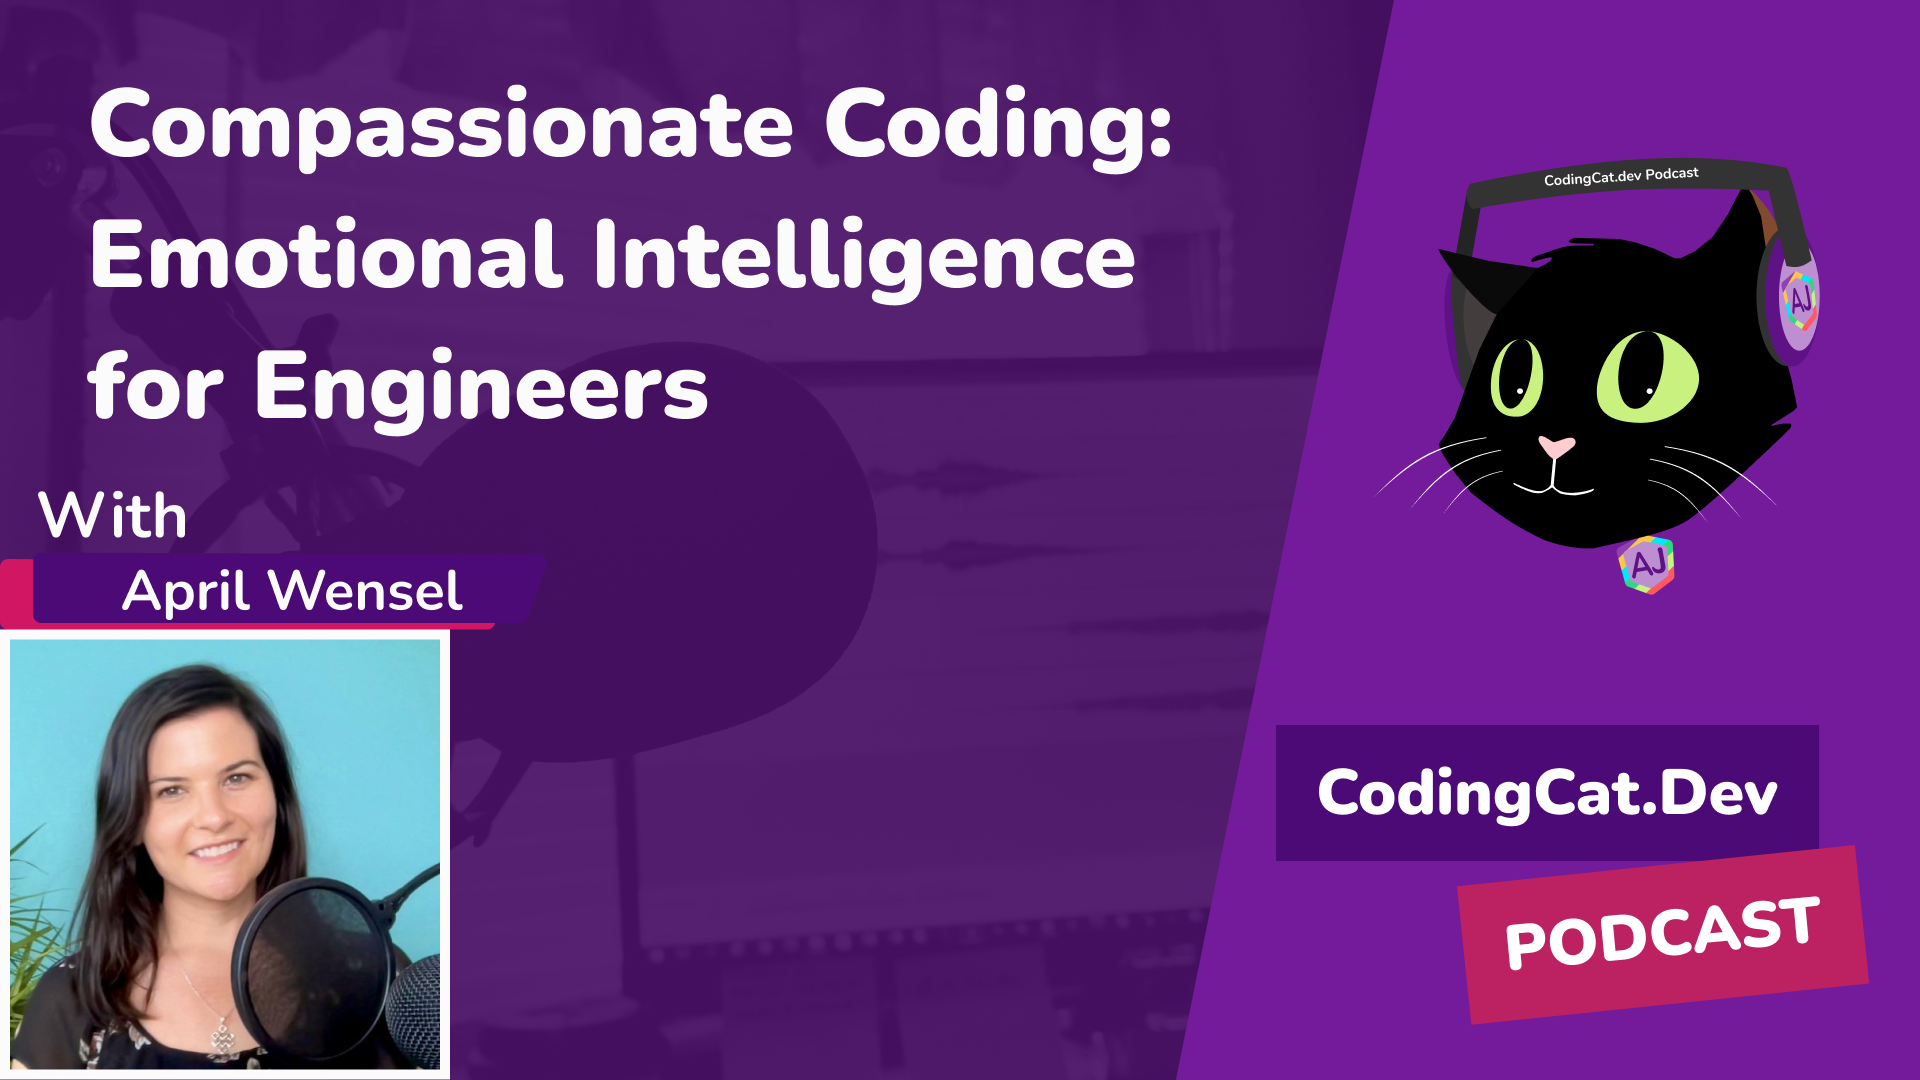 Compassionate Coding: Emotional Intelligence for Engineers